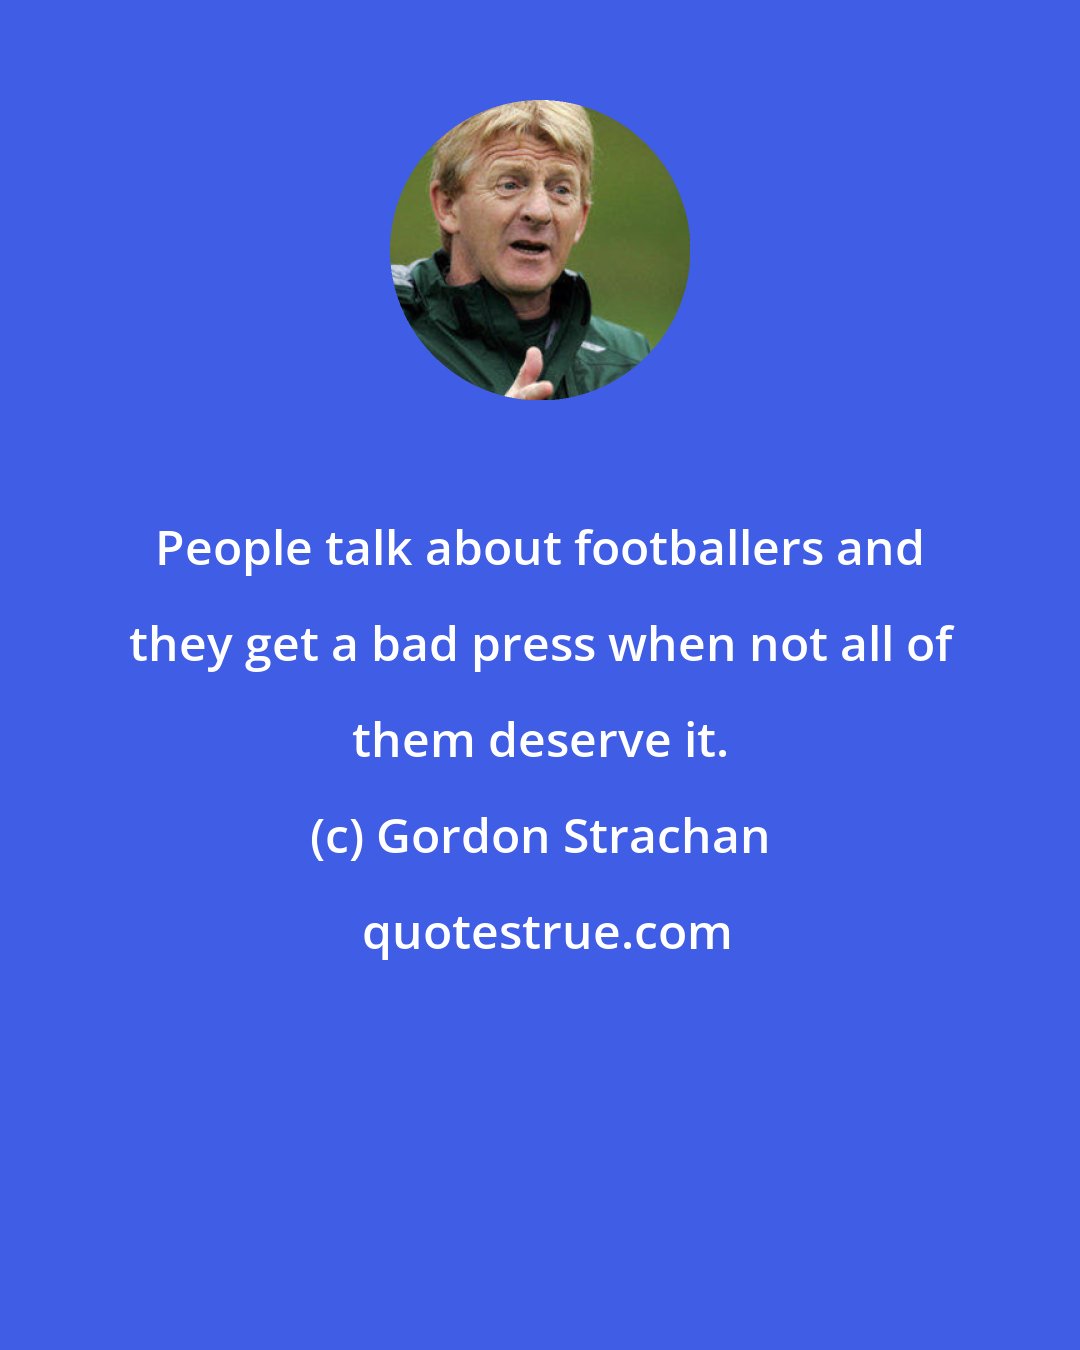 Gordon Strachan: People talk about footballers and they get a bad press when not all of them deserve it.